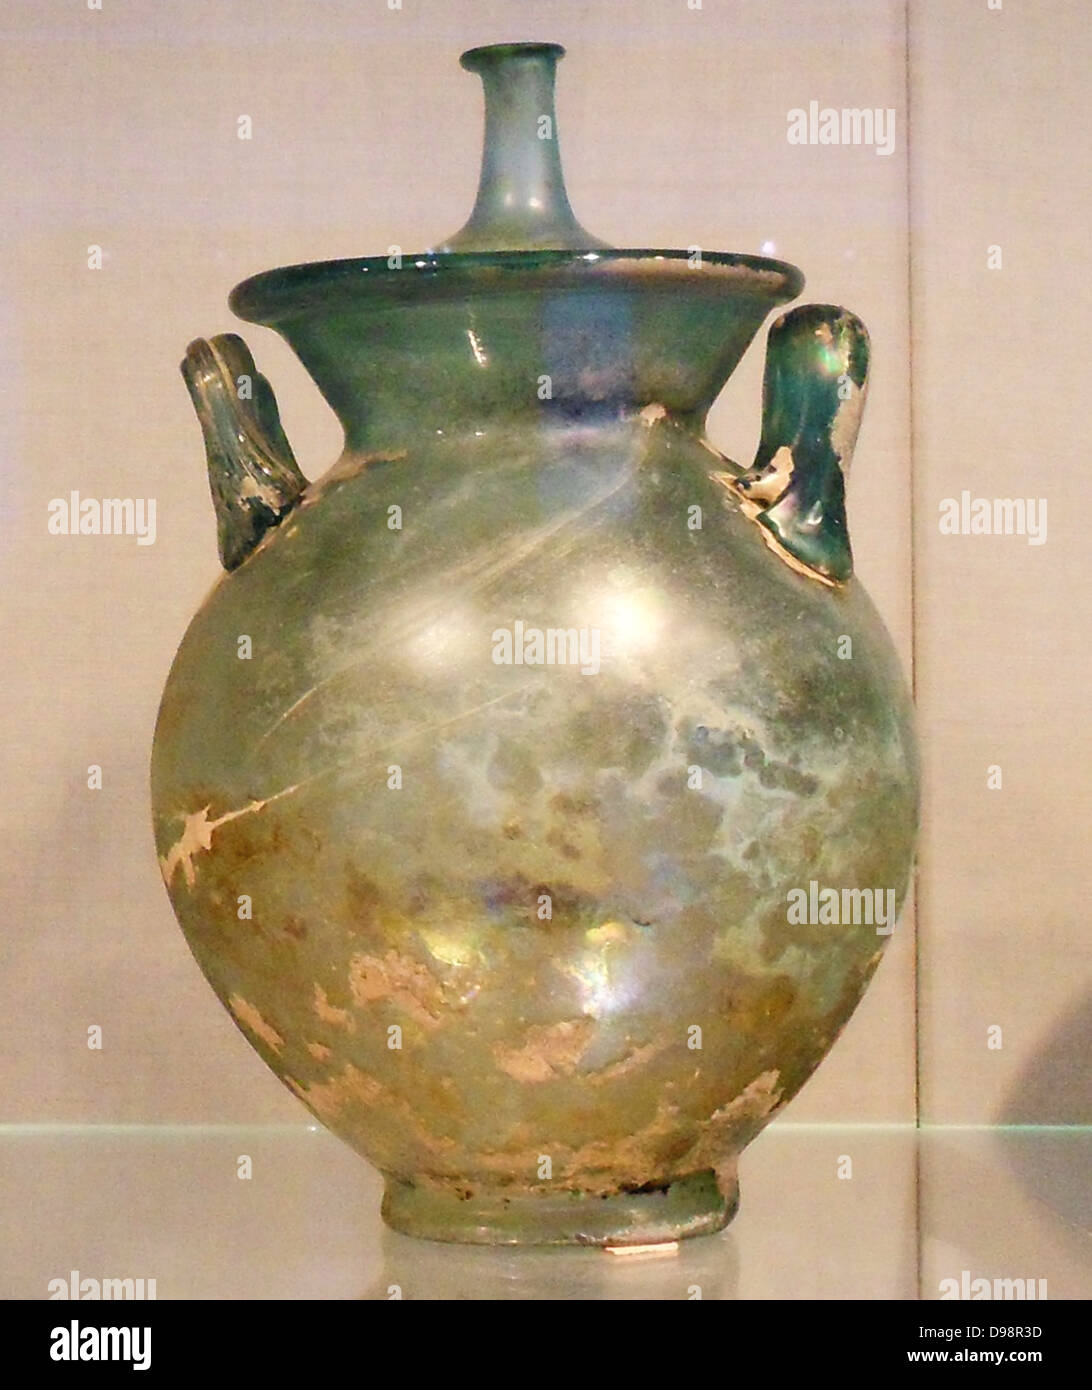 Glass cinerary urn with lid. Roman 1st century A.D. Stock Photo